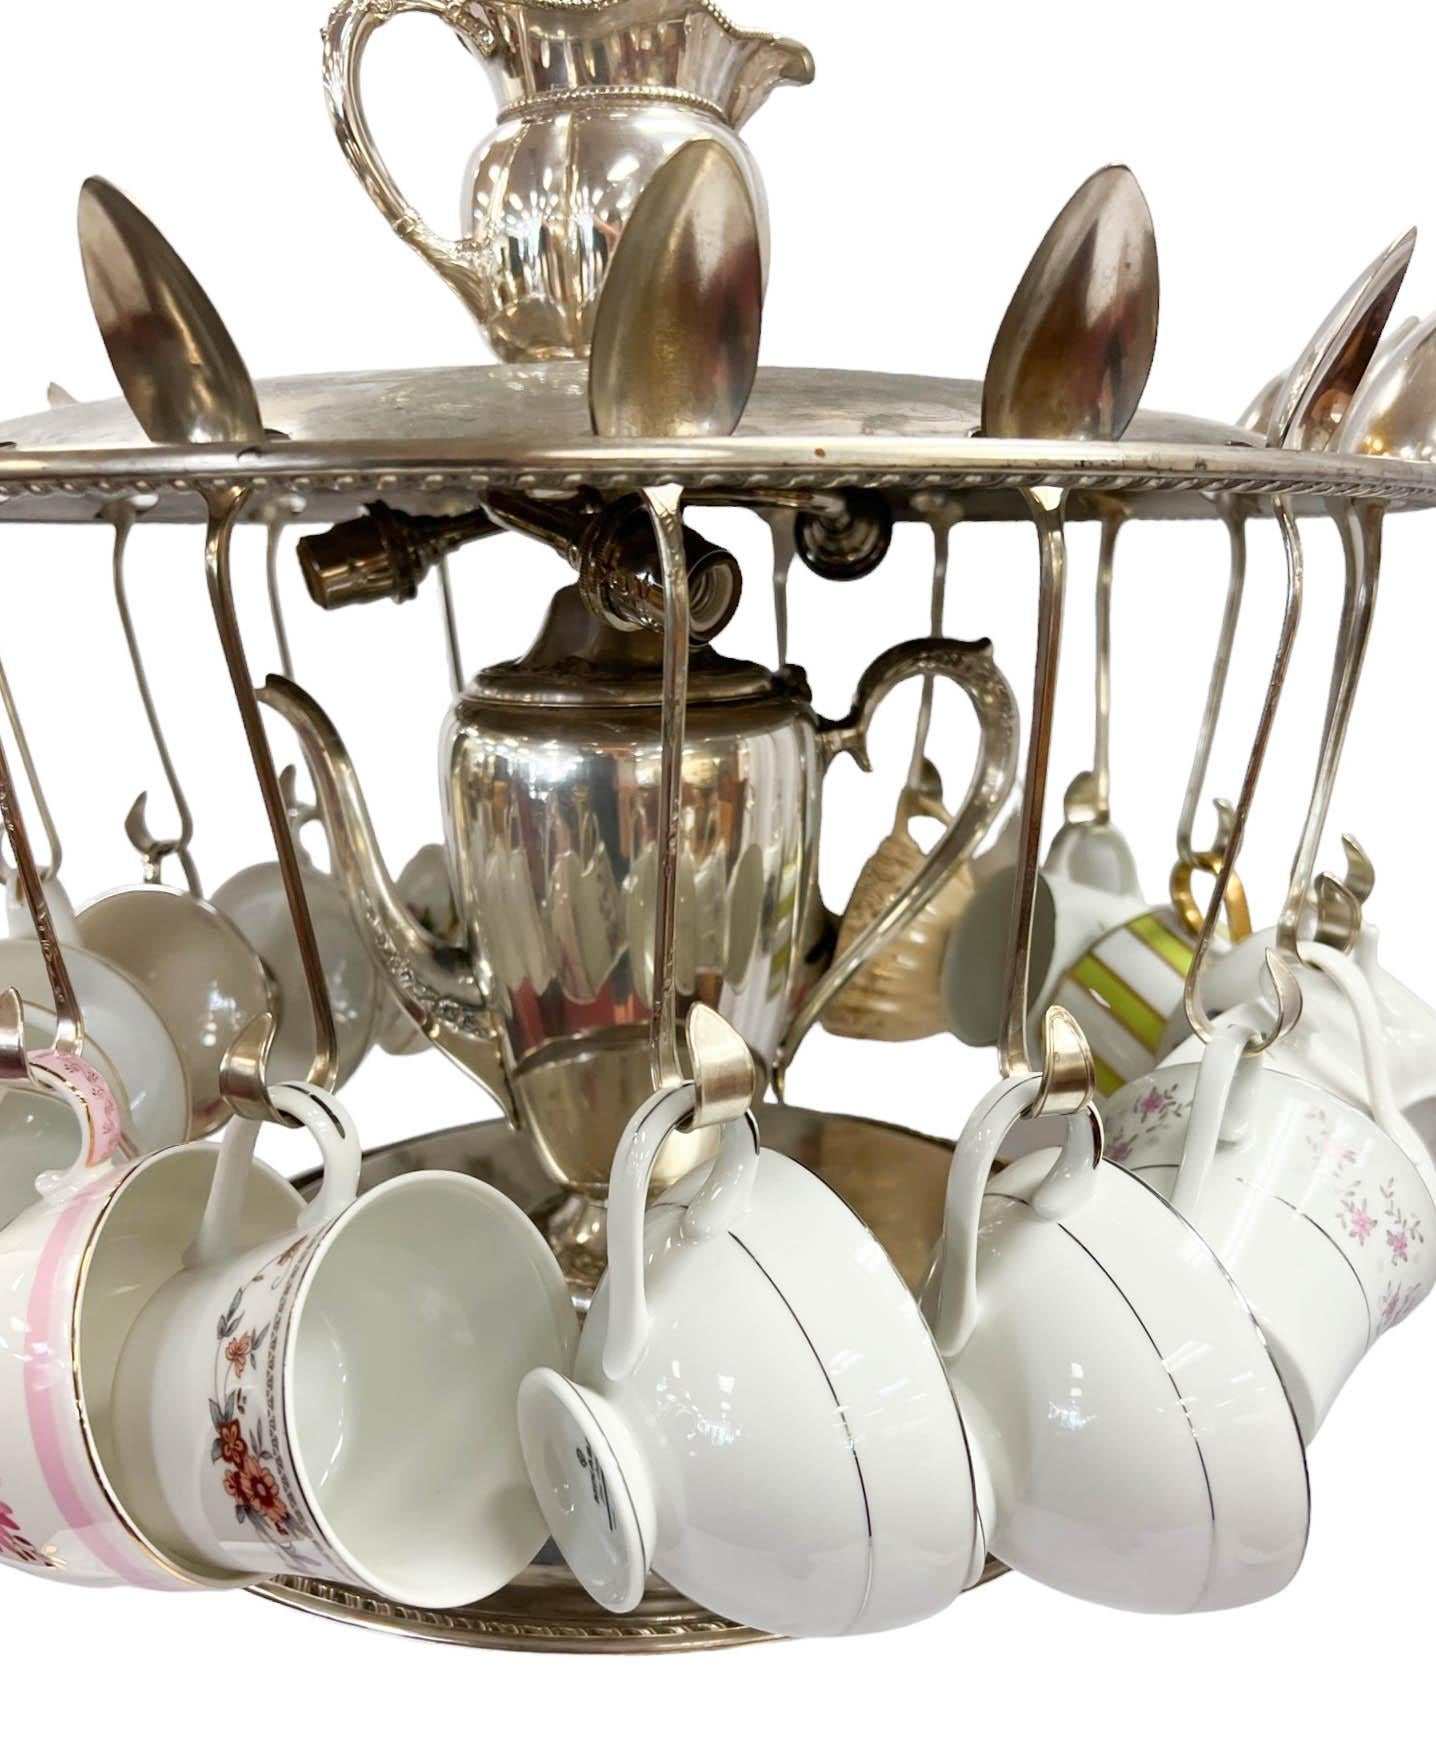 Silver Plate Vintage One-Of-A-Kind Handcrafted Teacup Chandelier For Sale